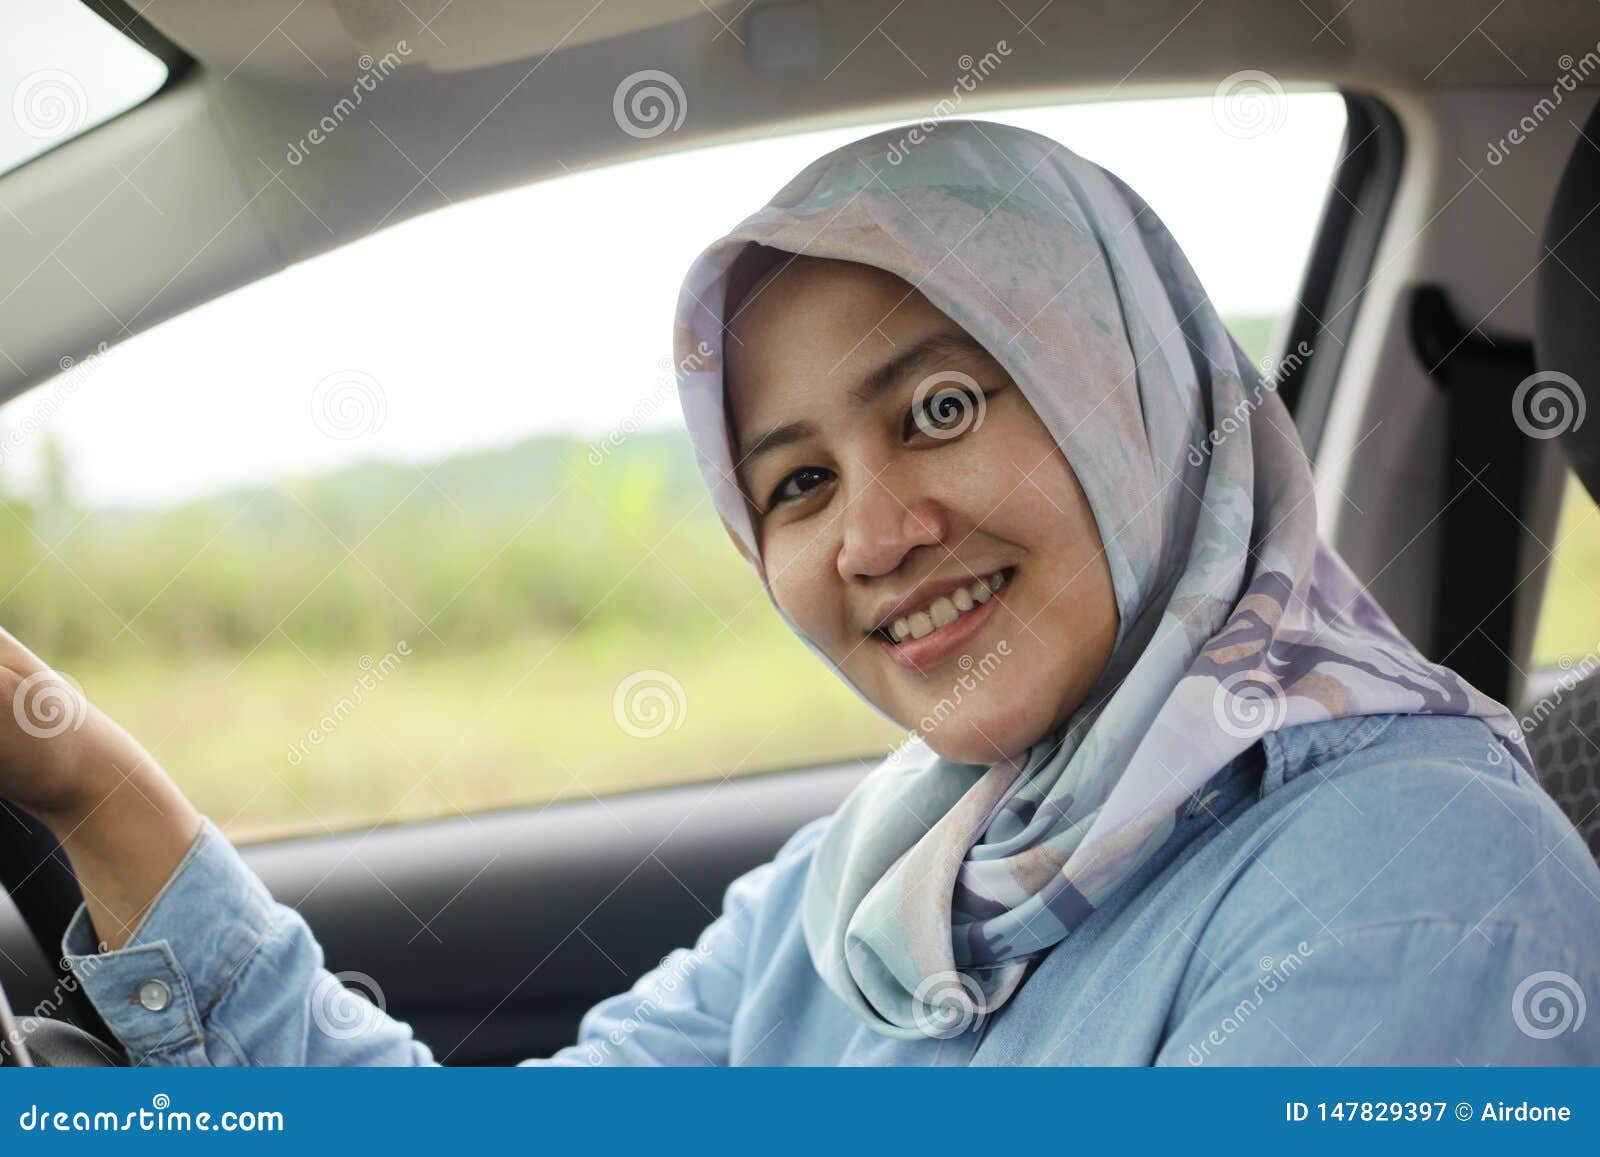 muslim lady driving her car and smiling